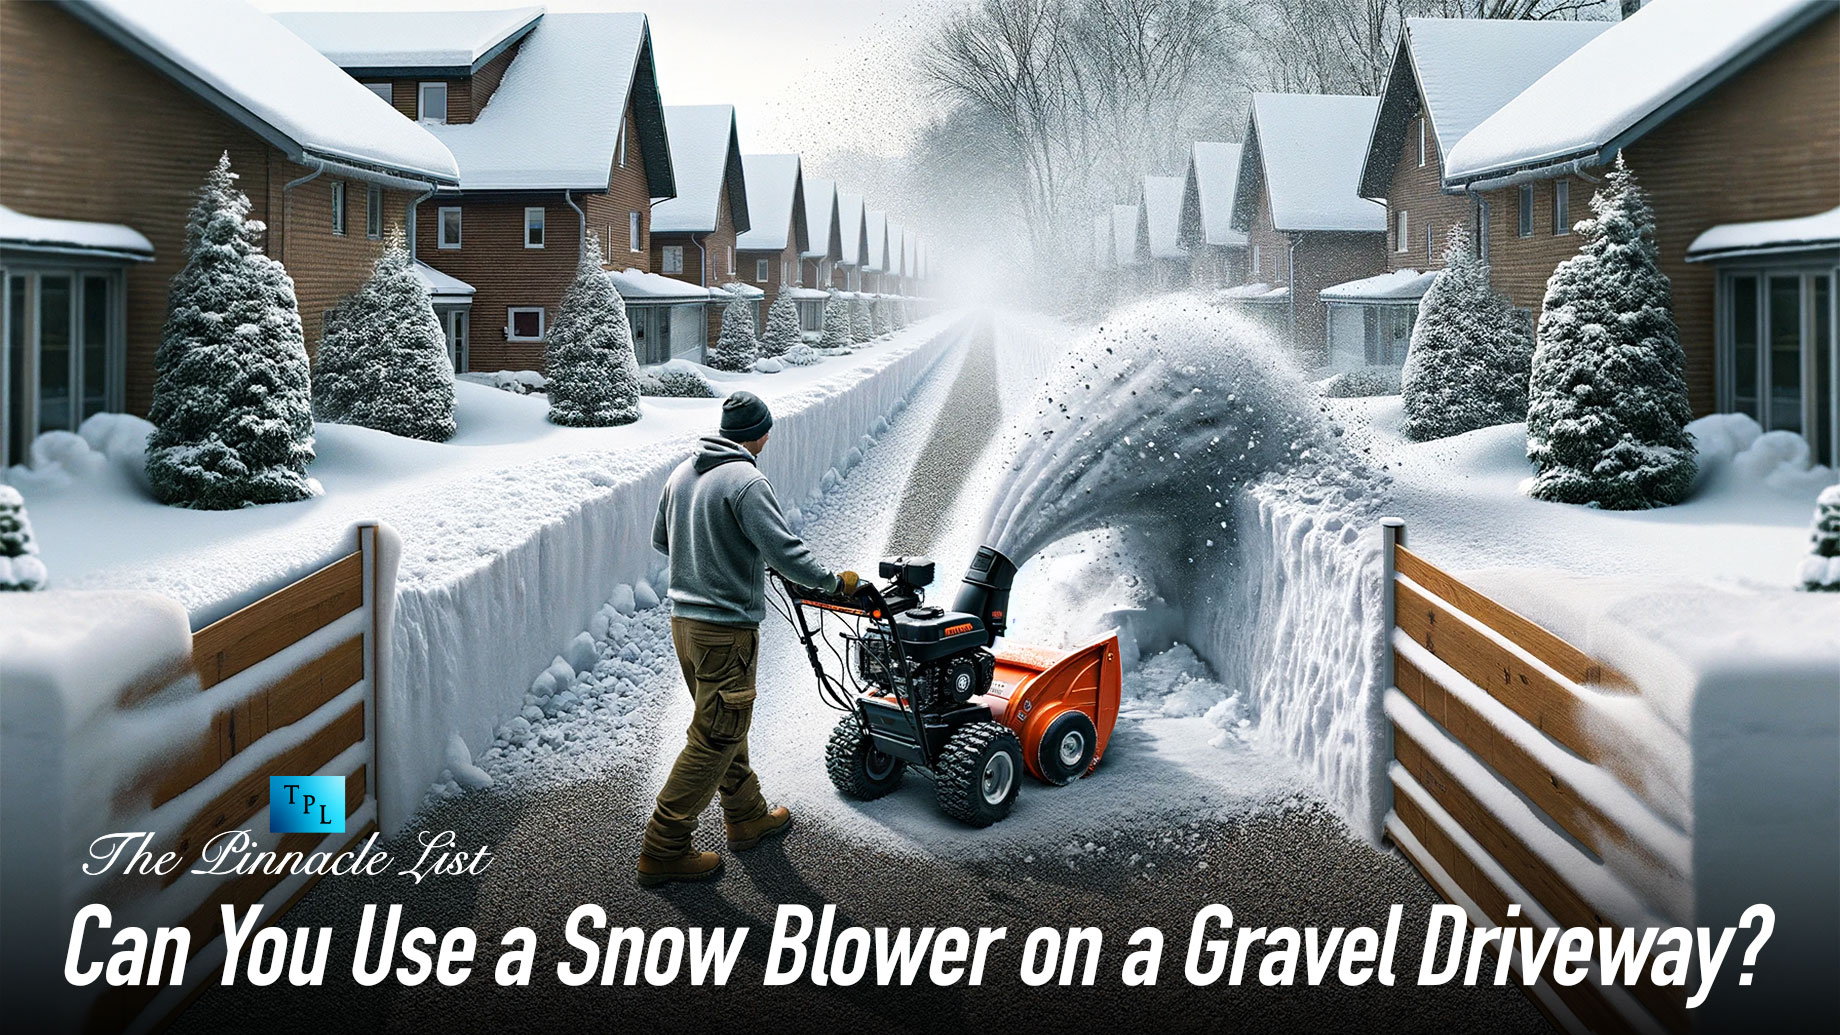 Can You Use a Snow Blower on a Gravel Driveway?